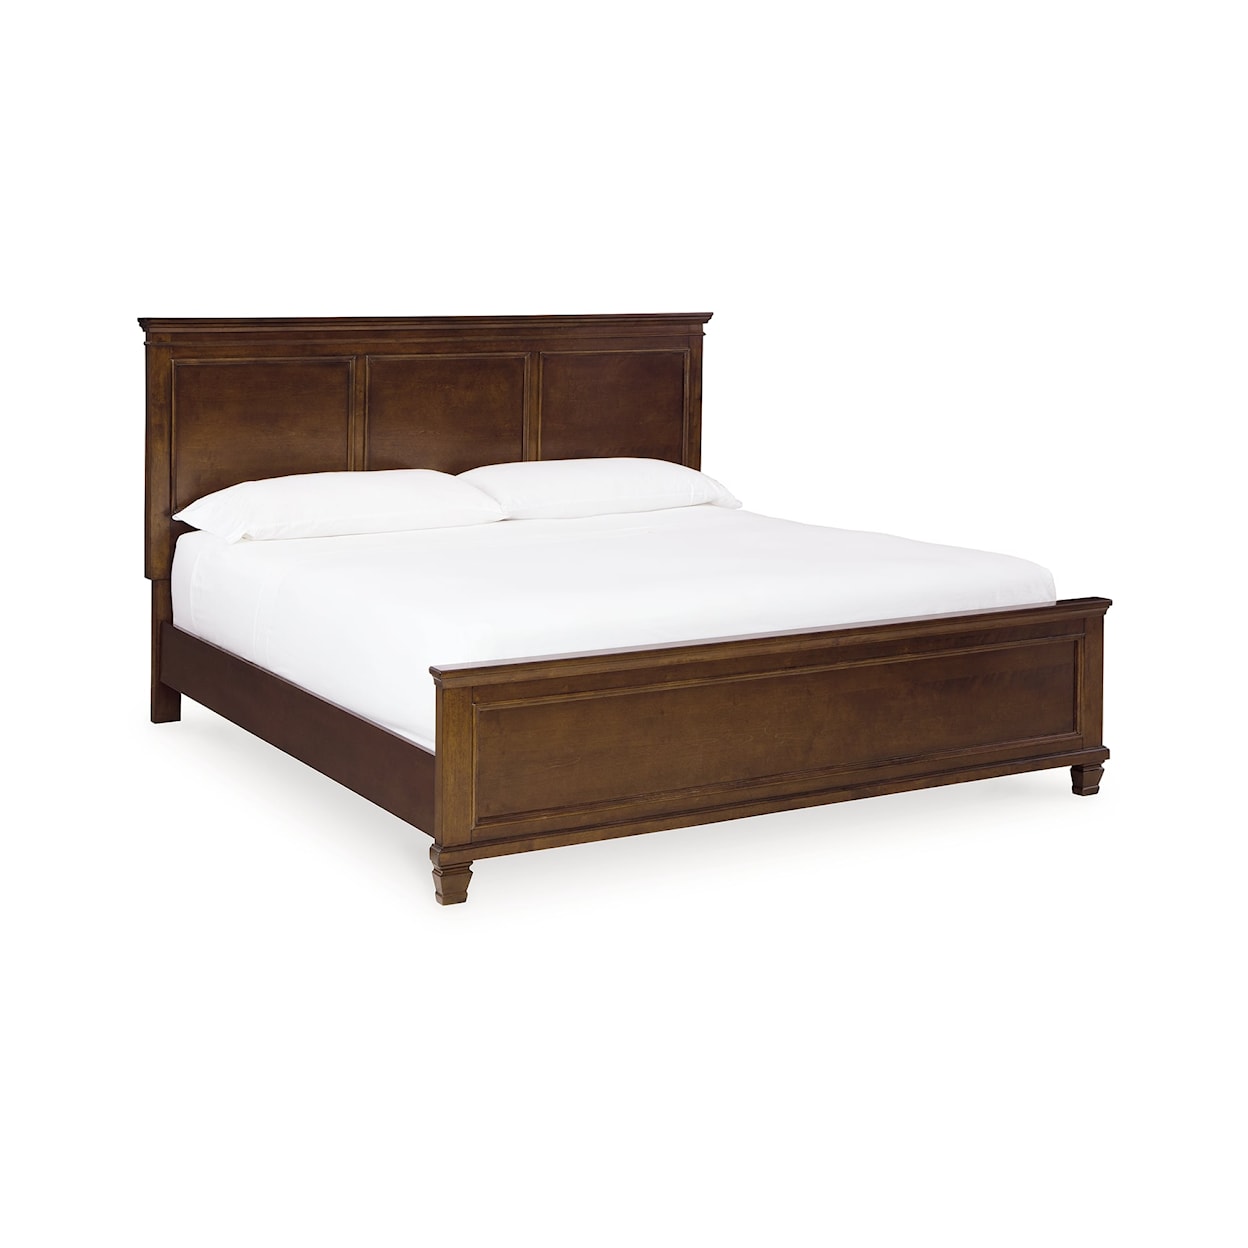 Signature Design by Ashley Furniture Danabrin King Panel Bed